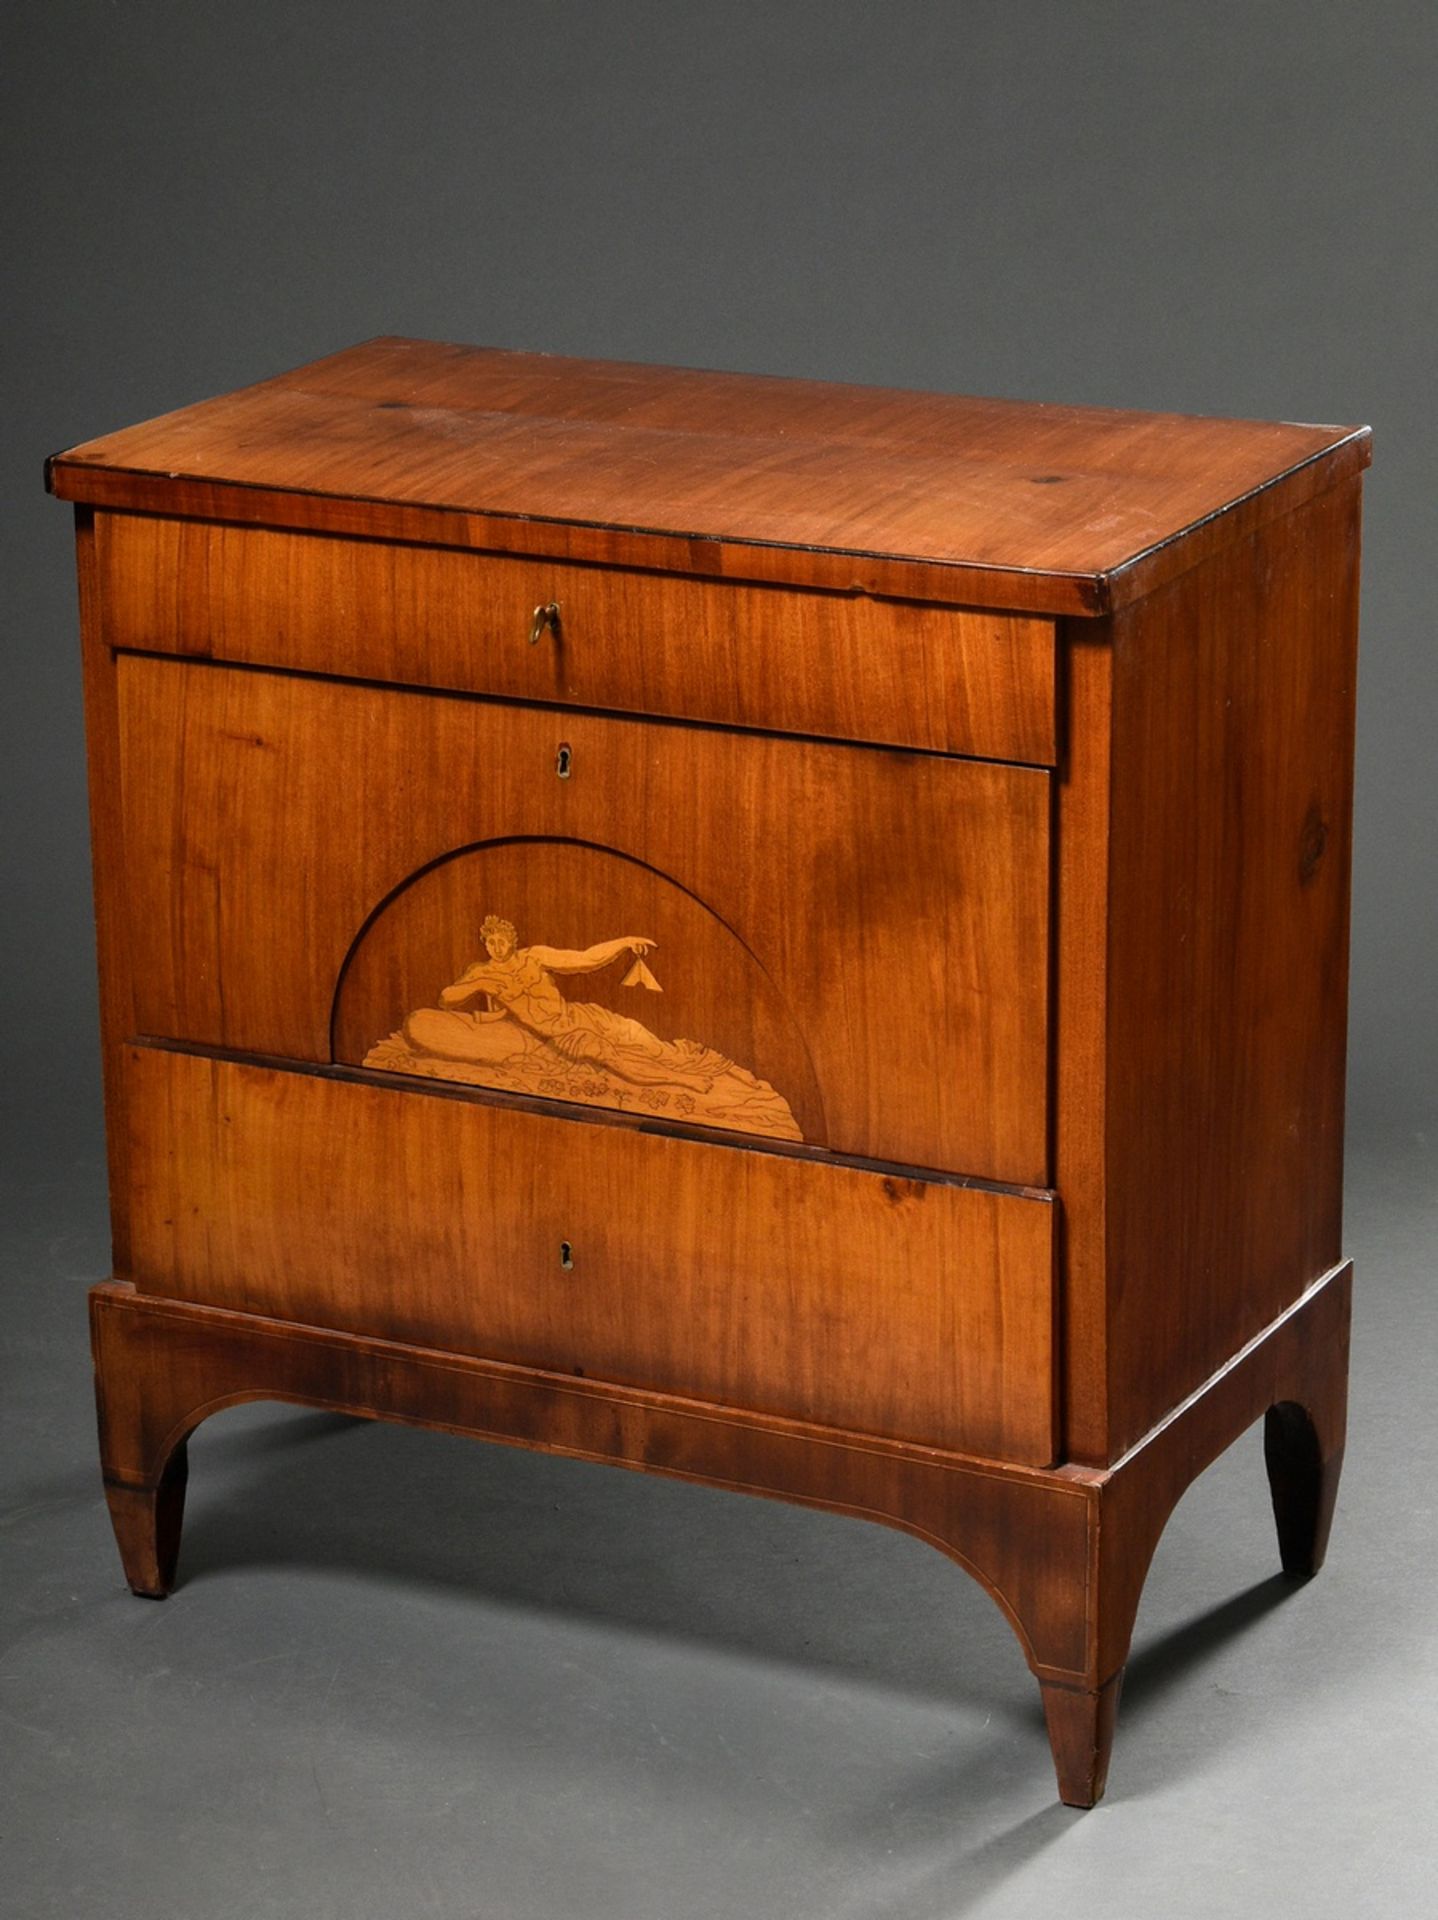 Danish Biedermeier chest of drawers with mythological inlay in segmental arch, upper drawer with mu